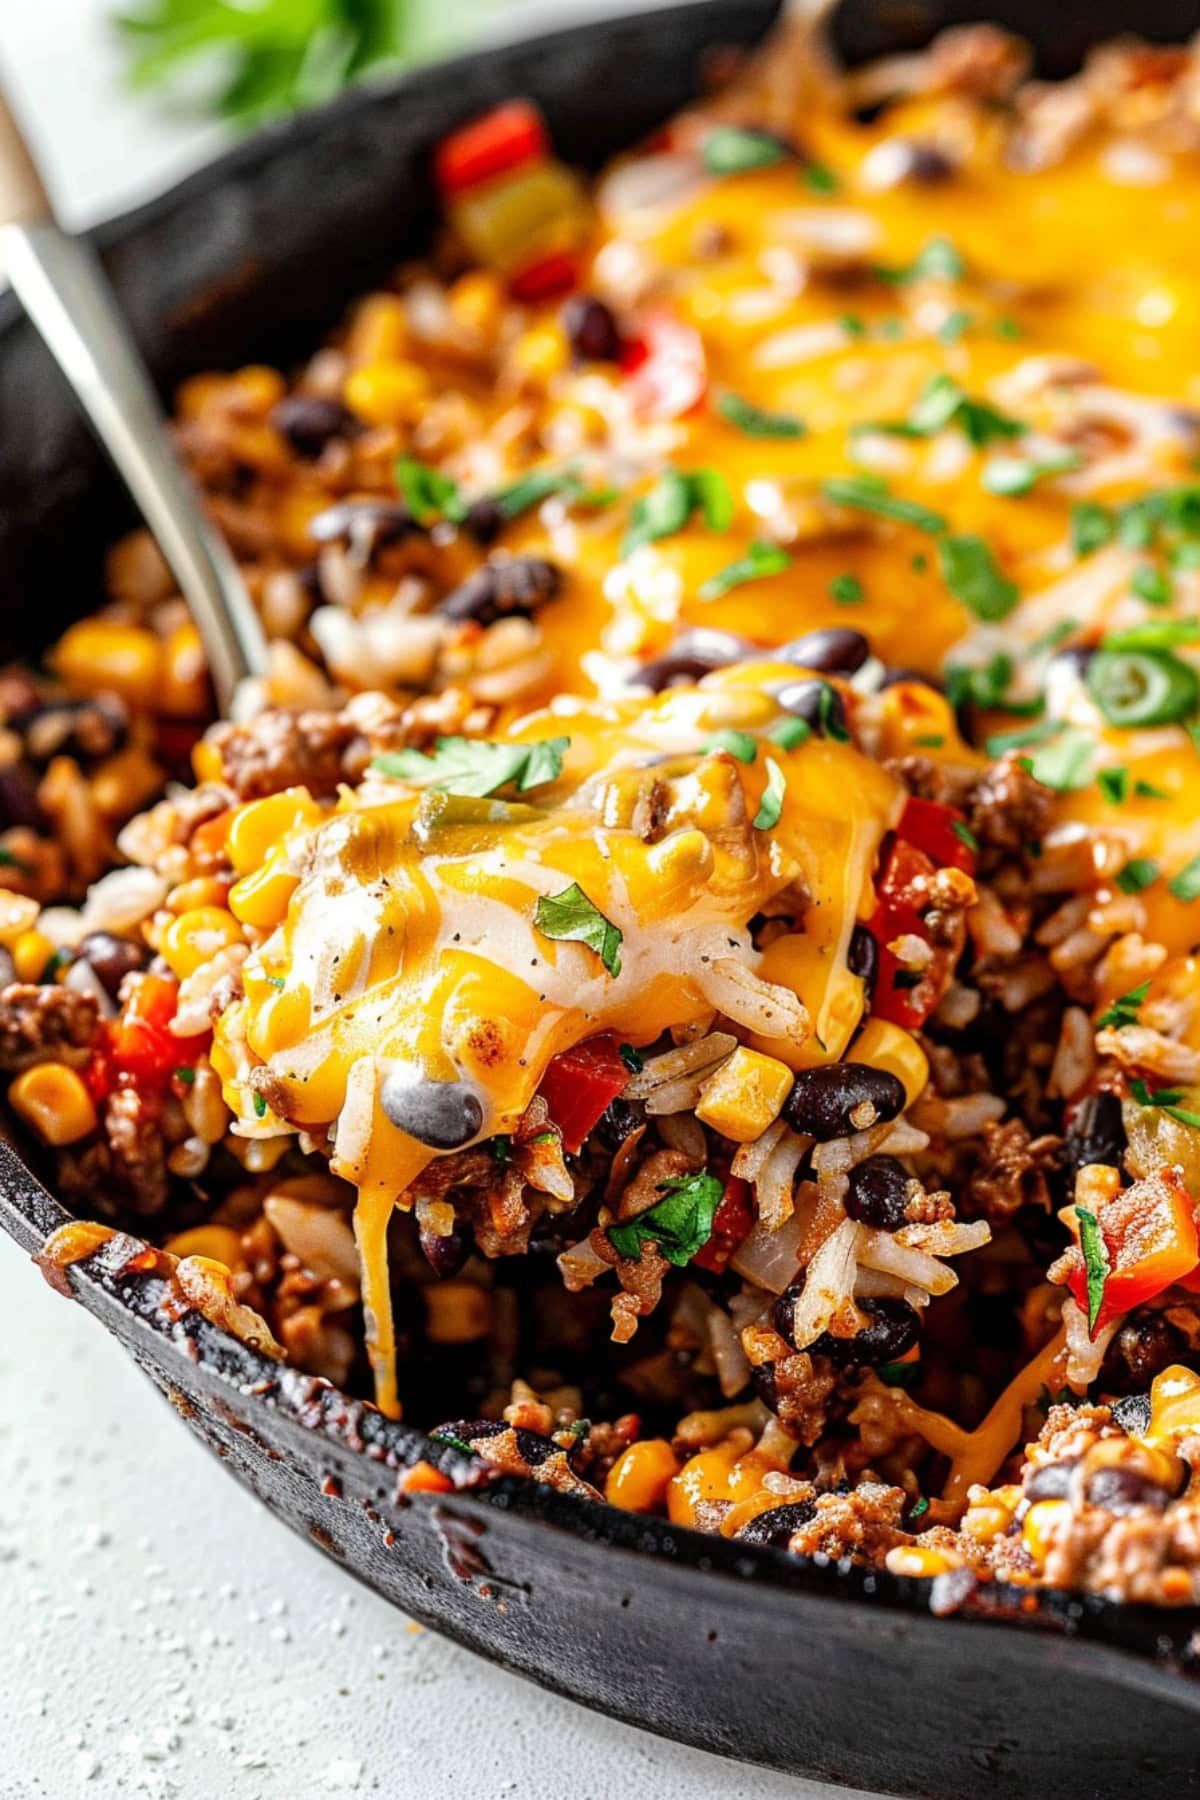 Taco made with ground beef with diced red bell pepper, diced red onion, corn kernels, cooked rice, black beans, salsa topped with melted cheese on a cast iron skillet pan